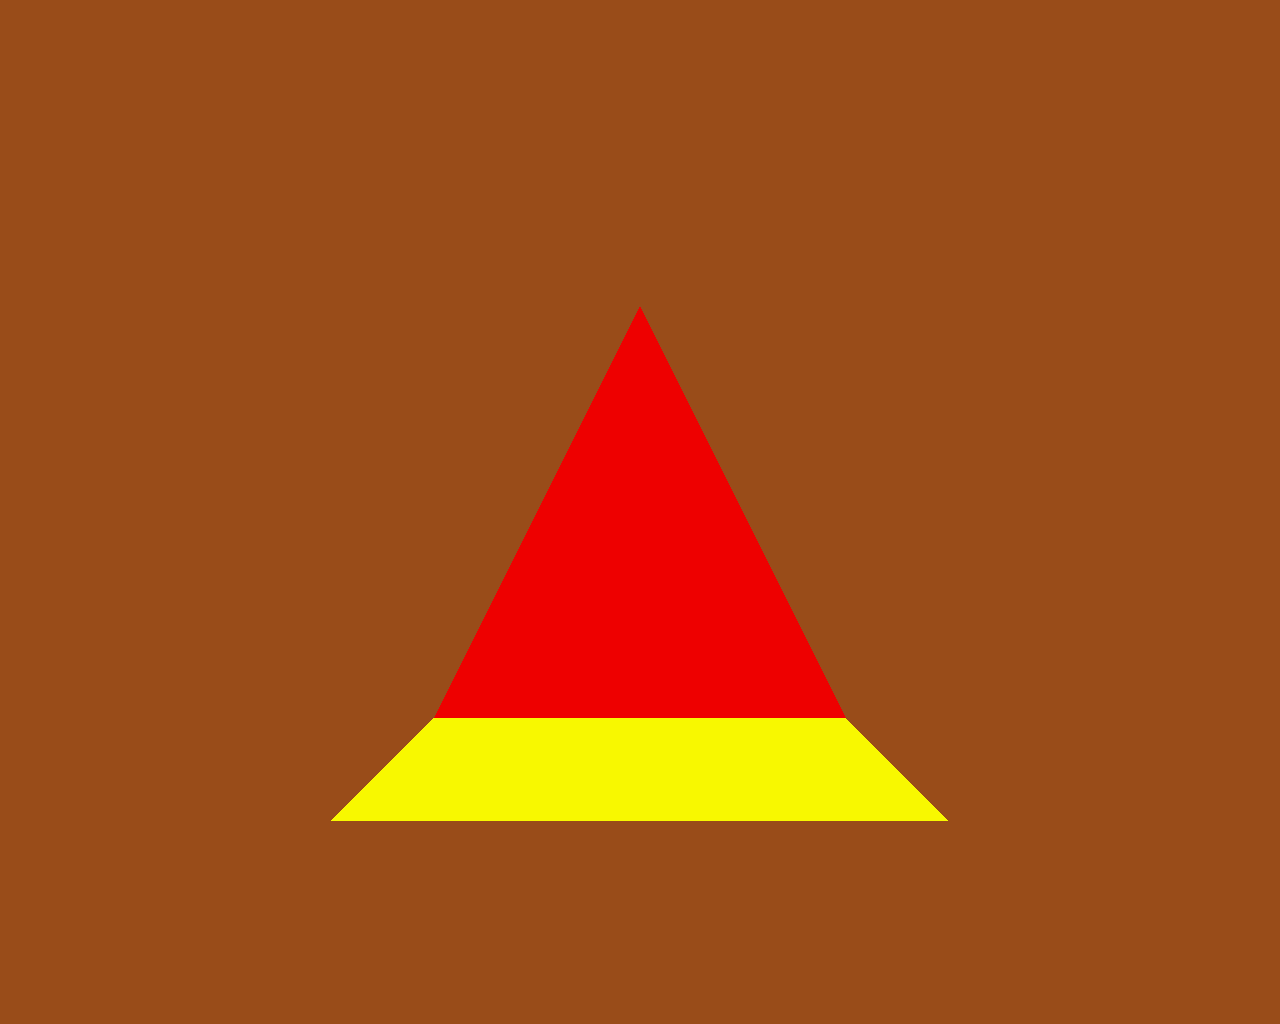 Red triangle, yellow square